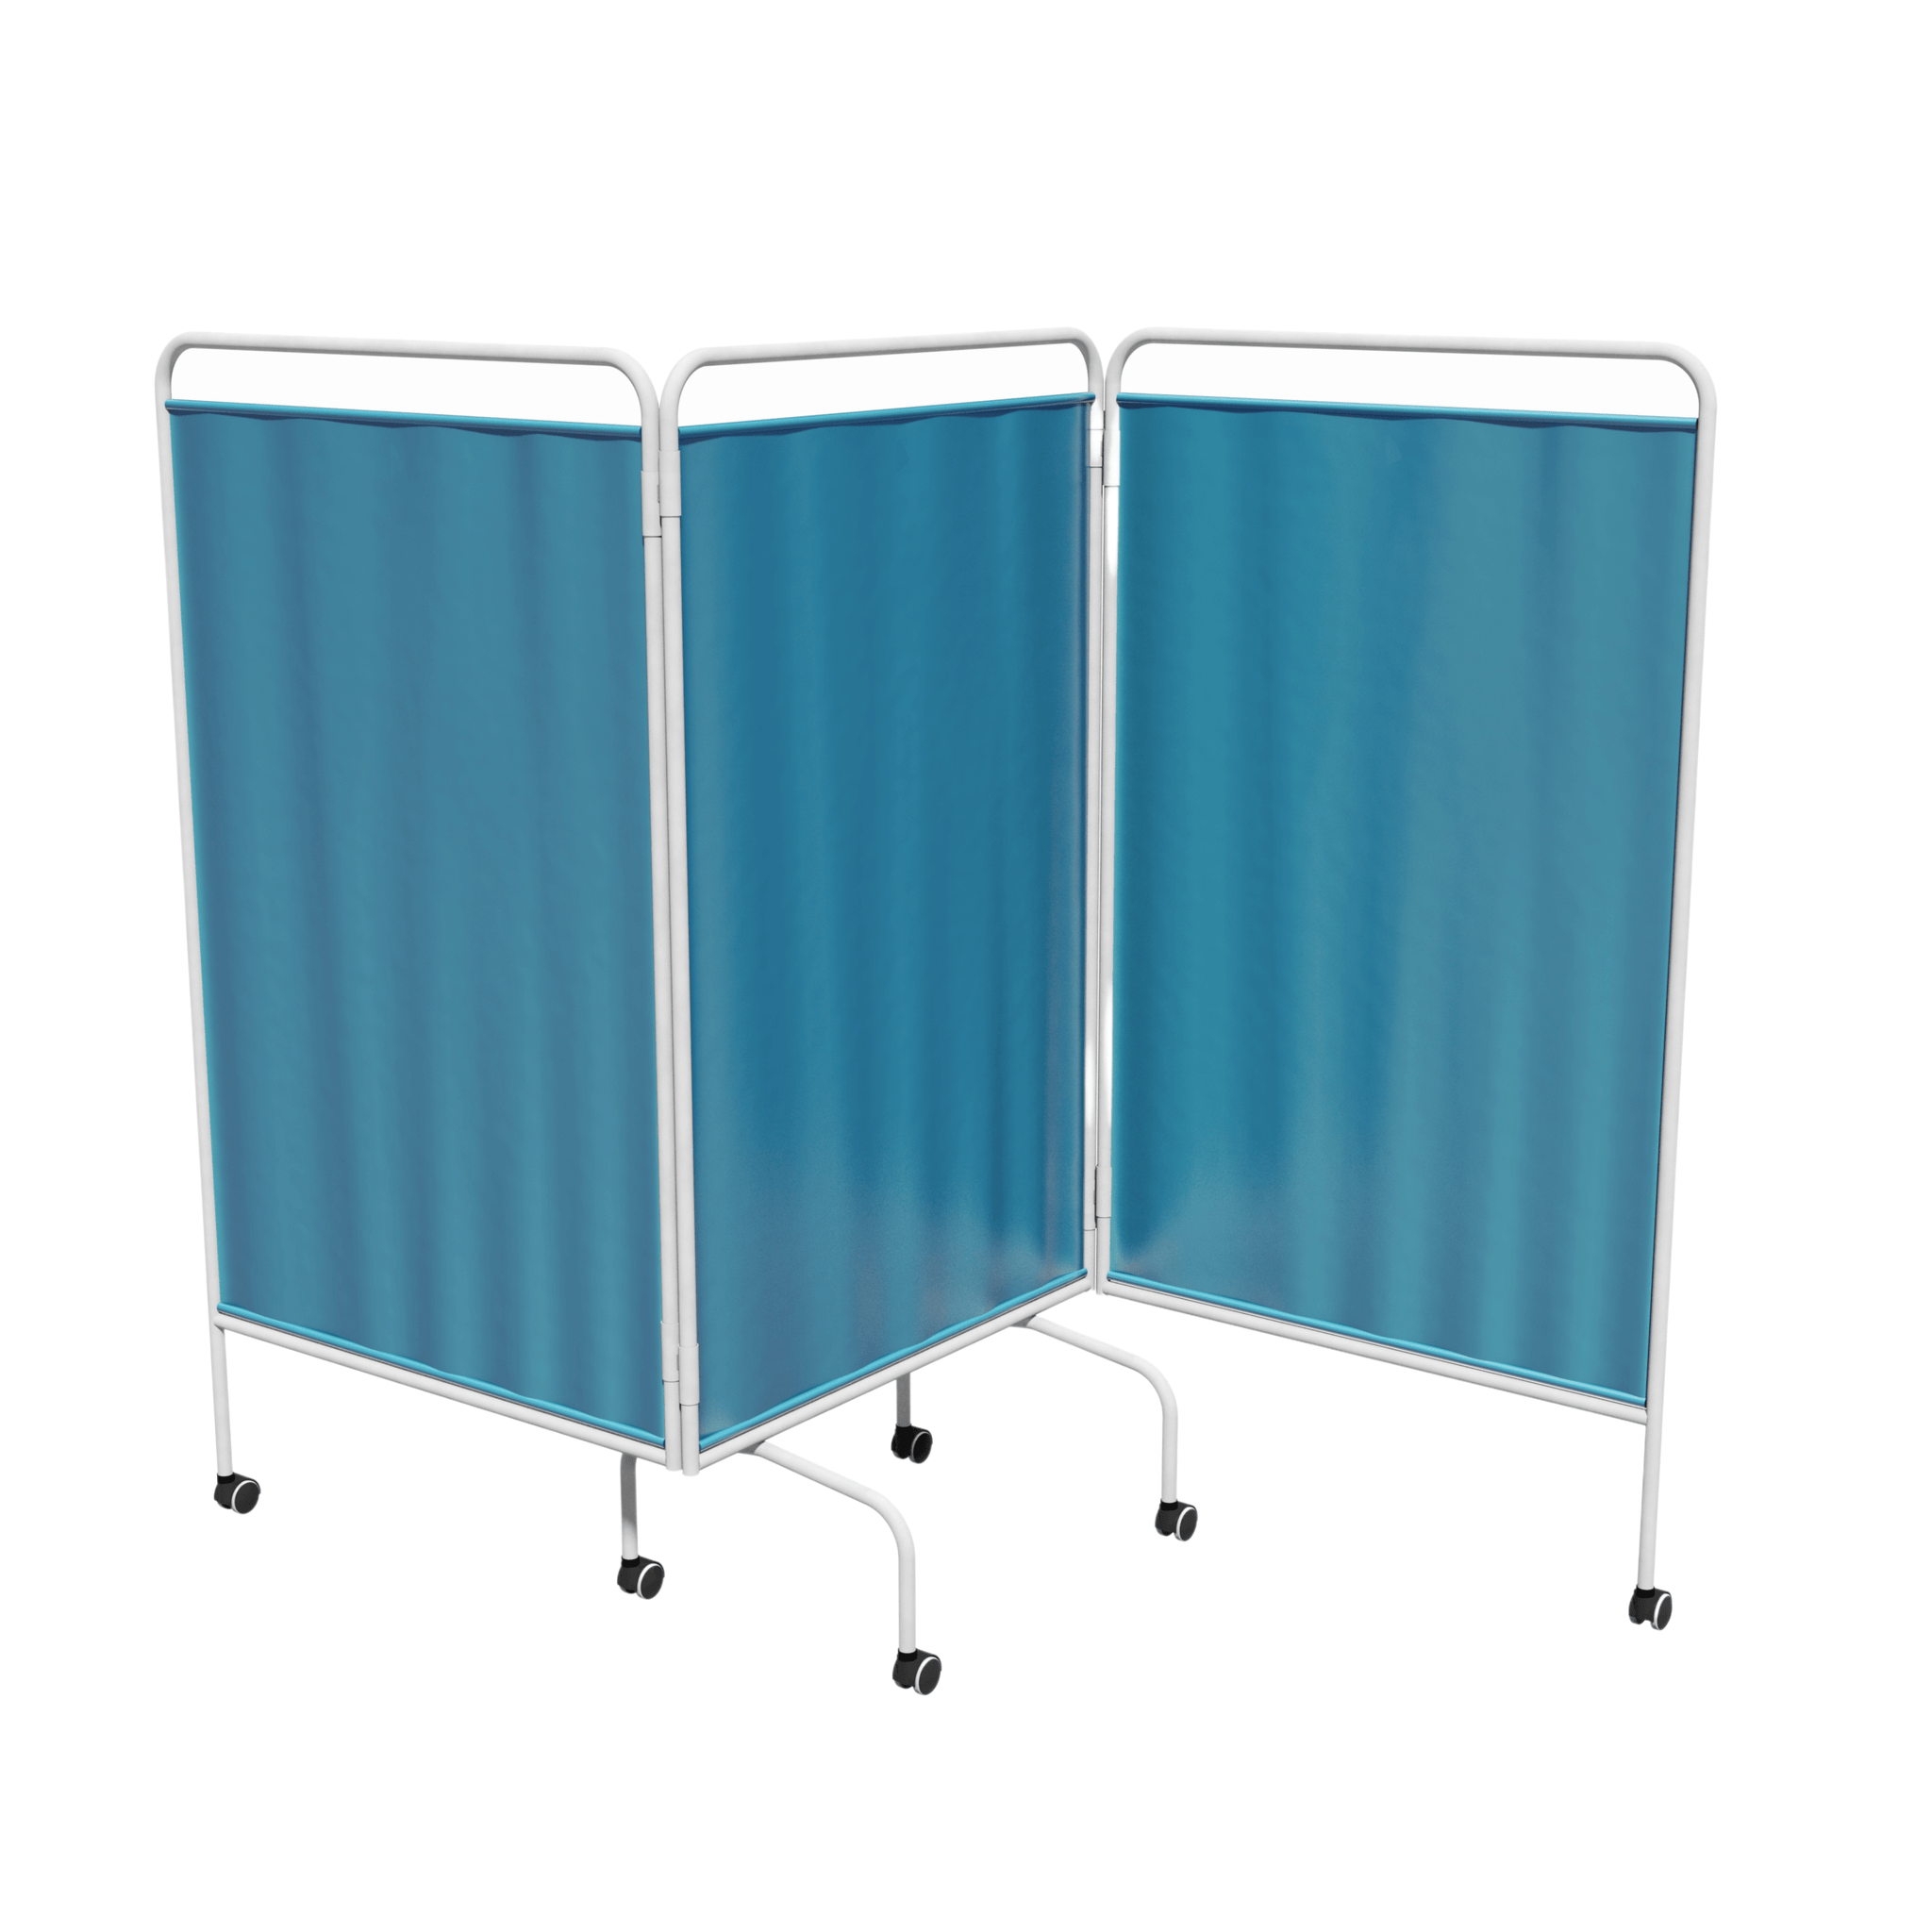 Privacy Screen- 3 Fold, Epoxy Coated, Royal Blue